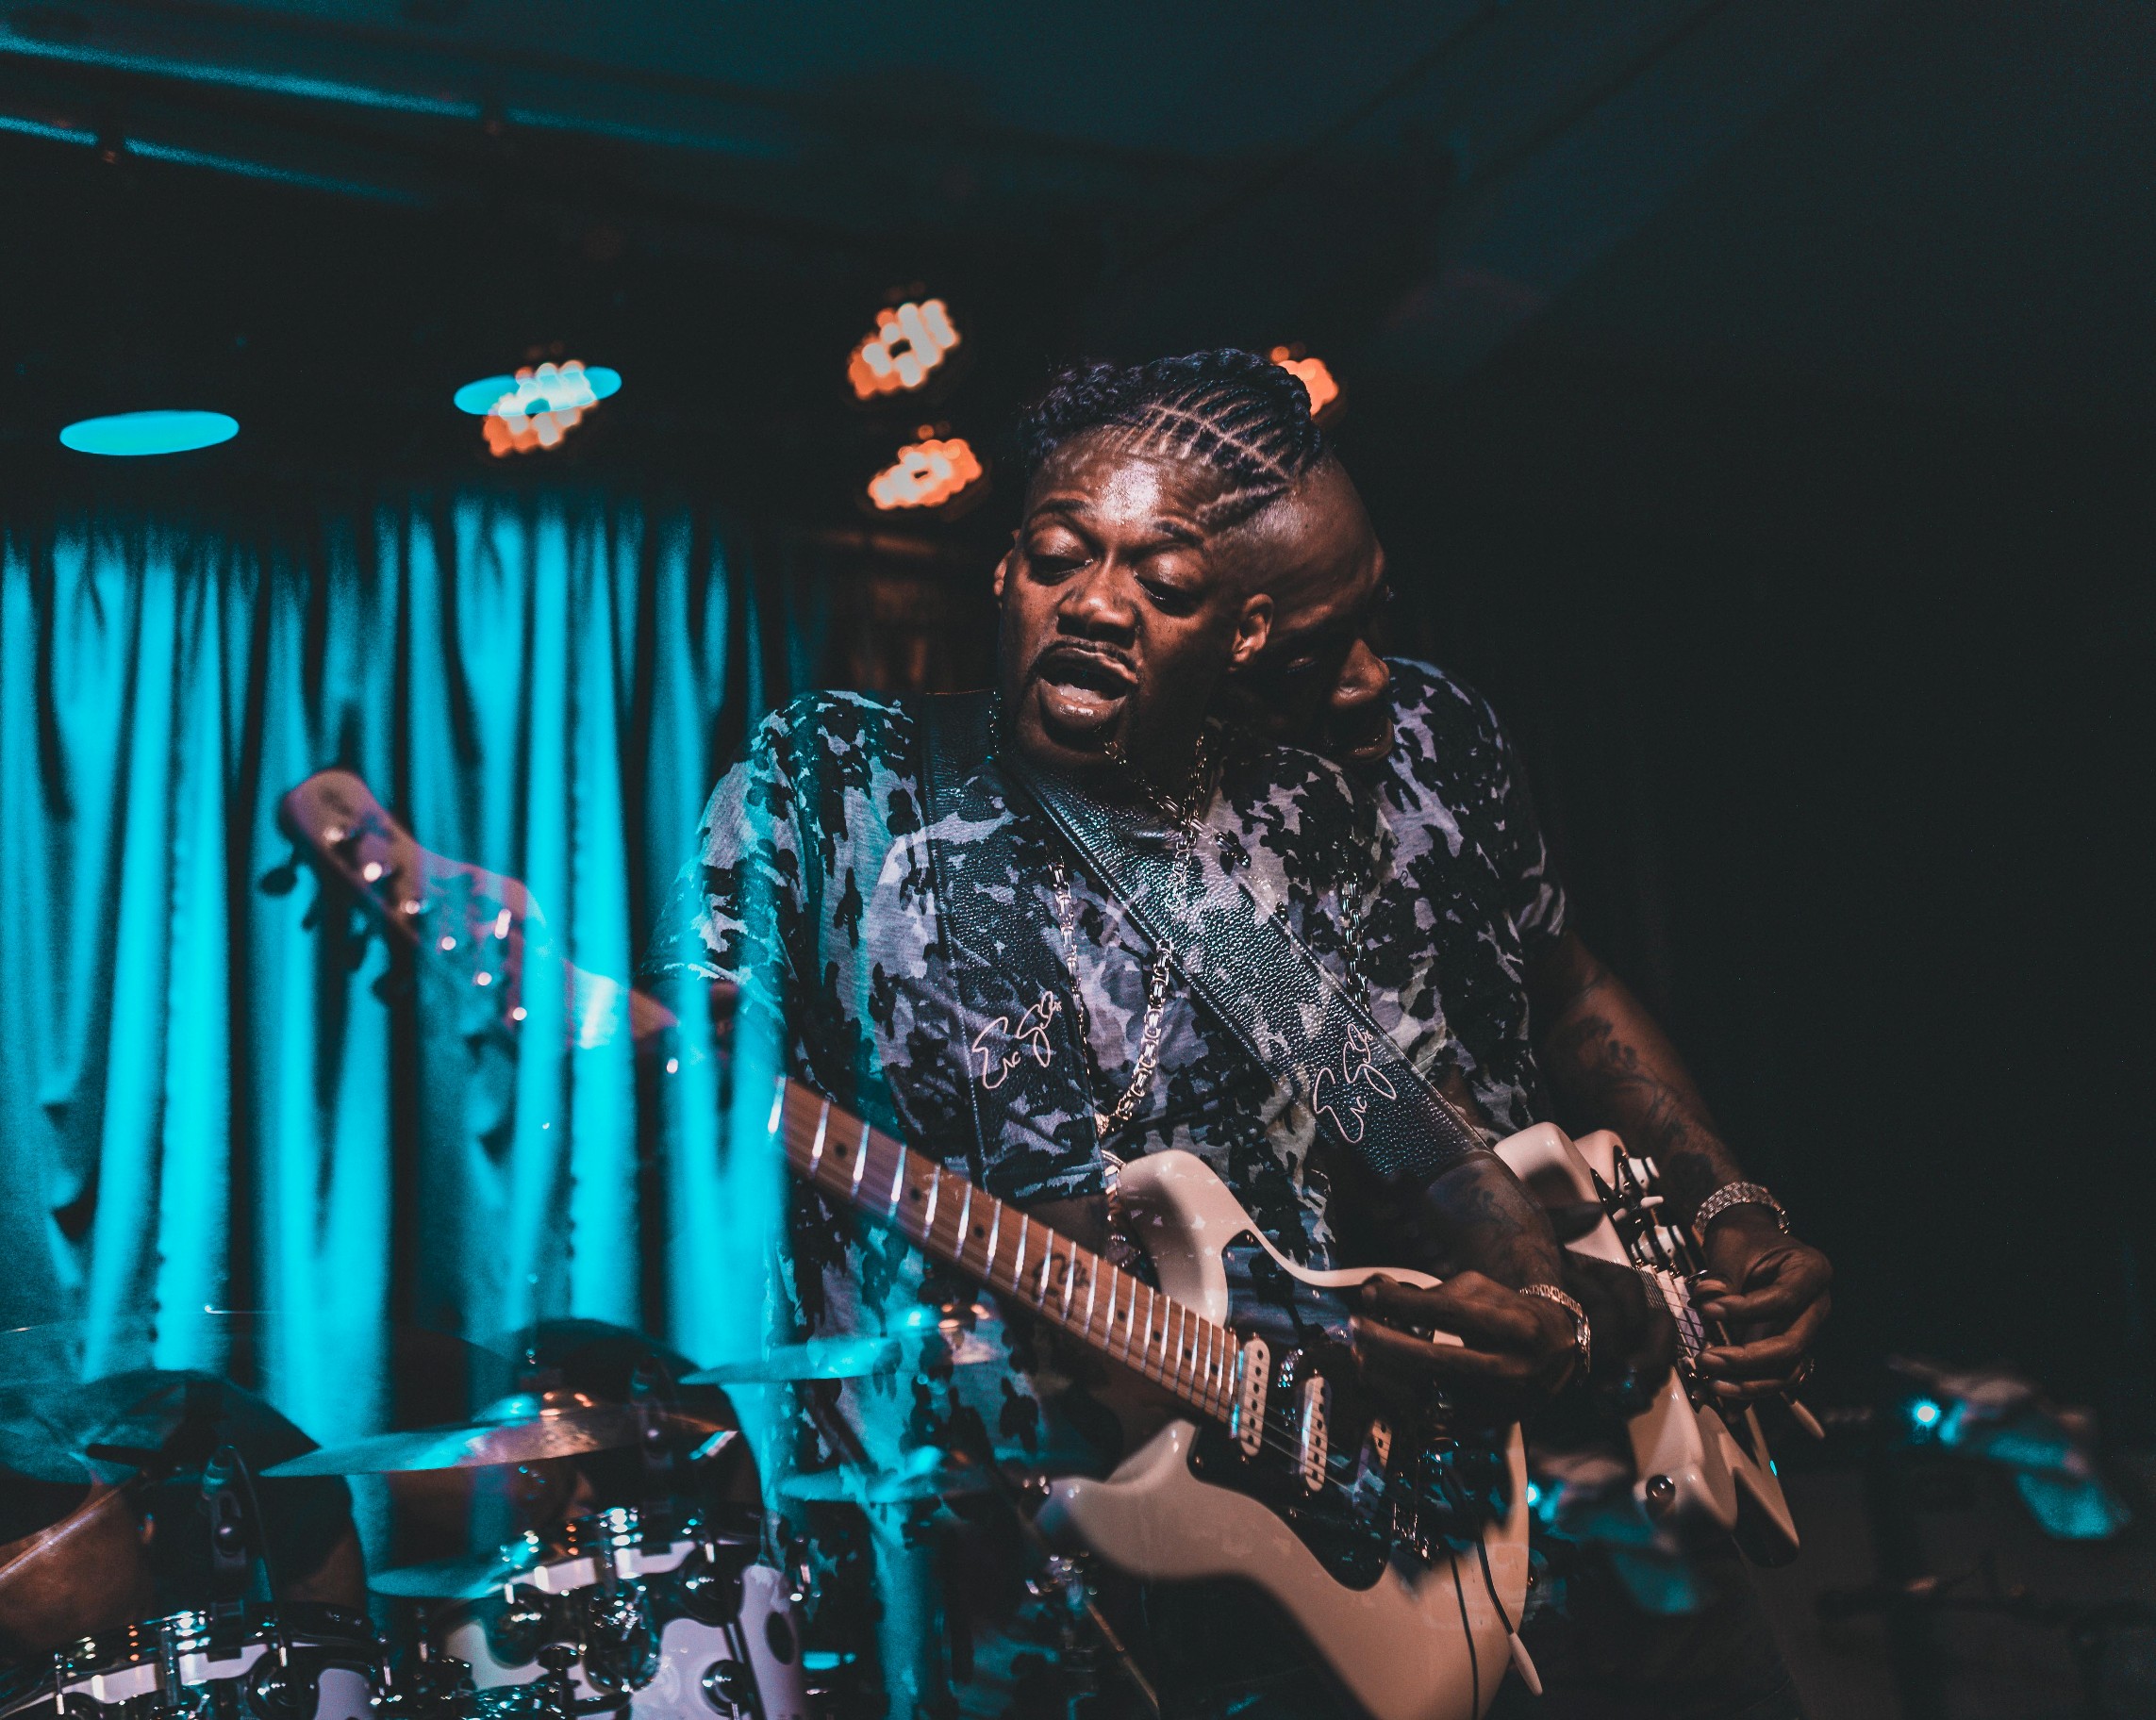 Eric Gales psychedelic by Ryan Swanich